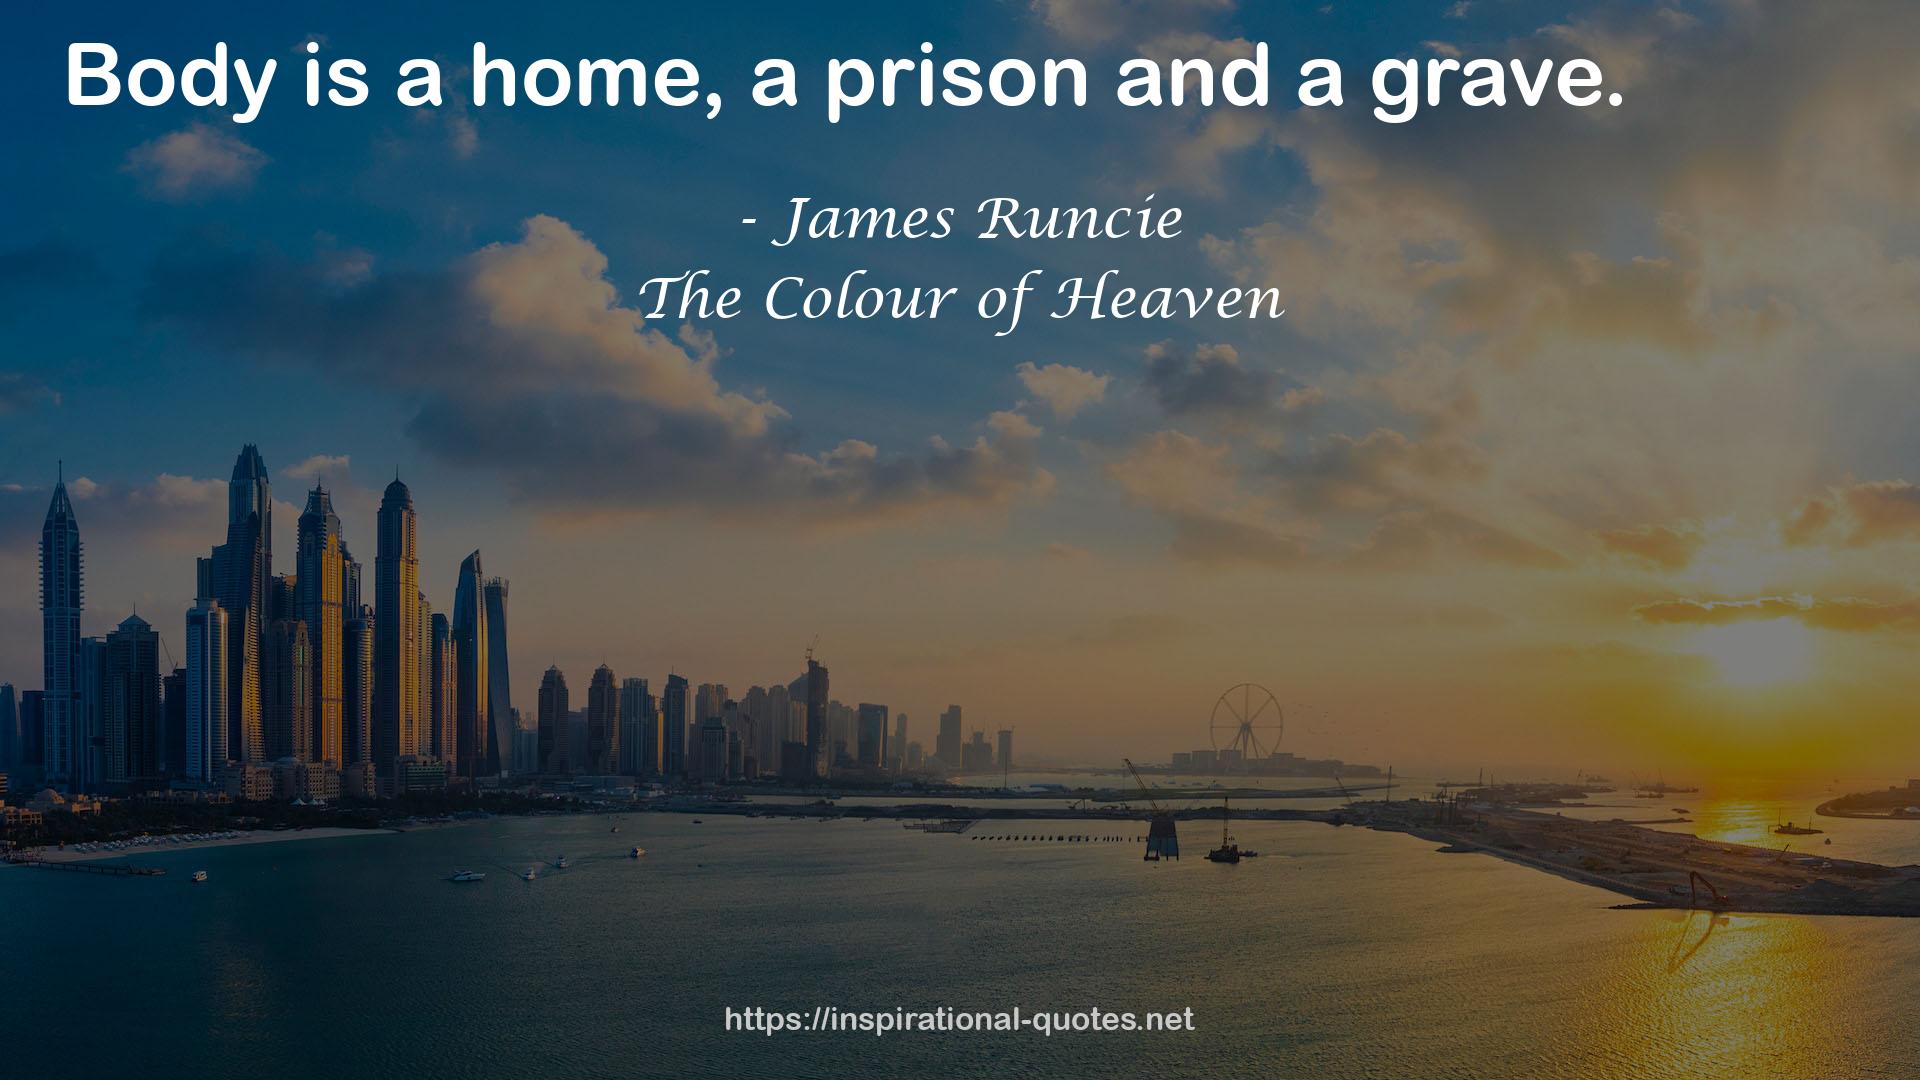 The Colour of Heaven QUOTES